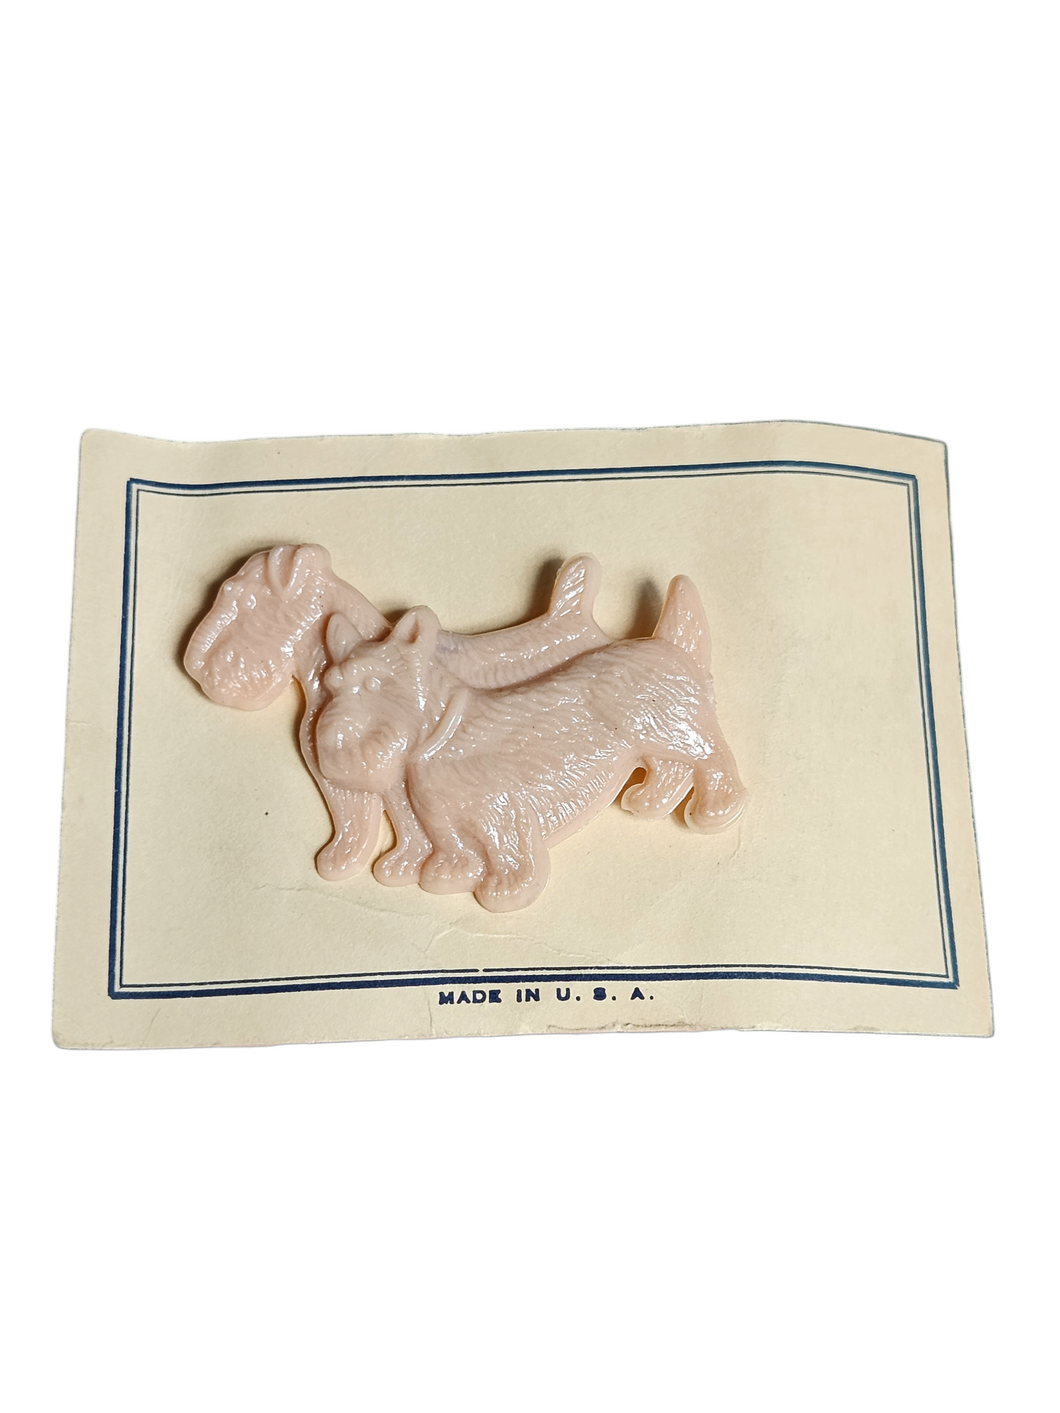 1940s Deadstock Pink Celluloid Dog Brooch